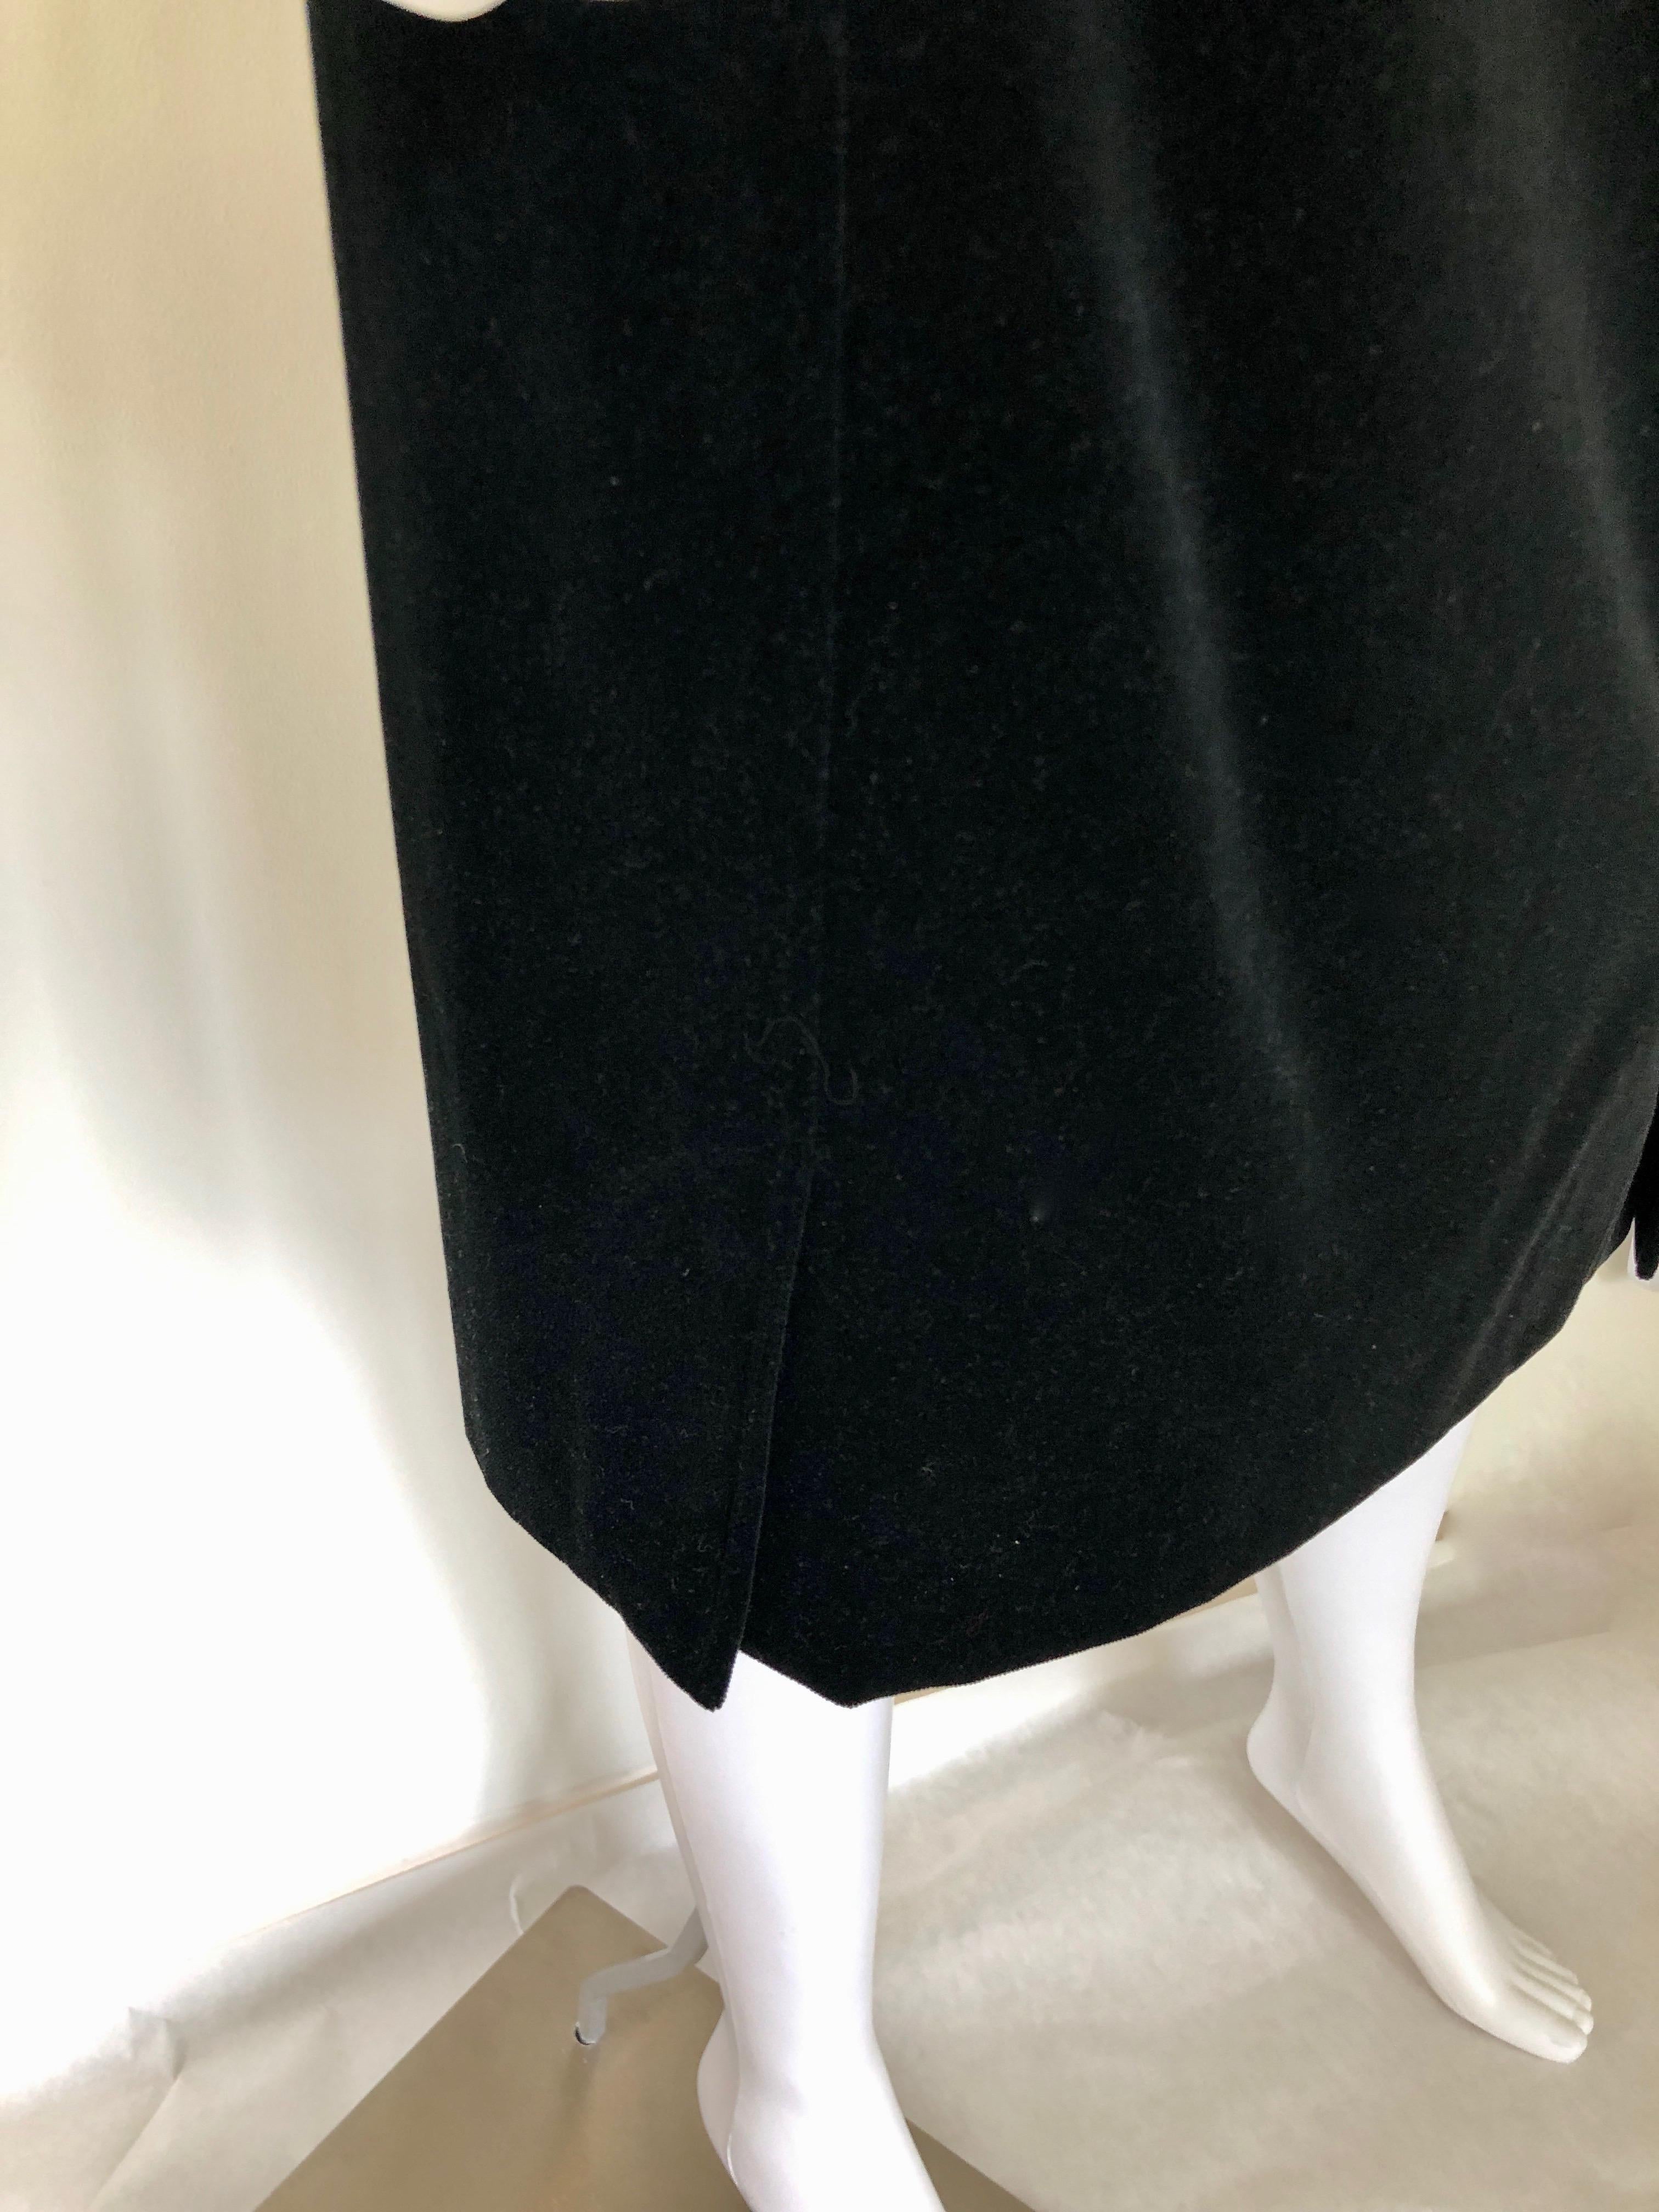 YSL Black Velvet Pencil Skirt w/ Back Zip, Two Front Vents & 4 Gold Buttons For Sale 2